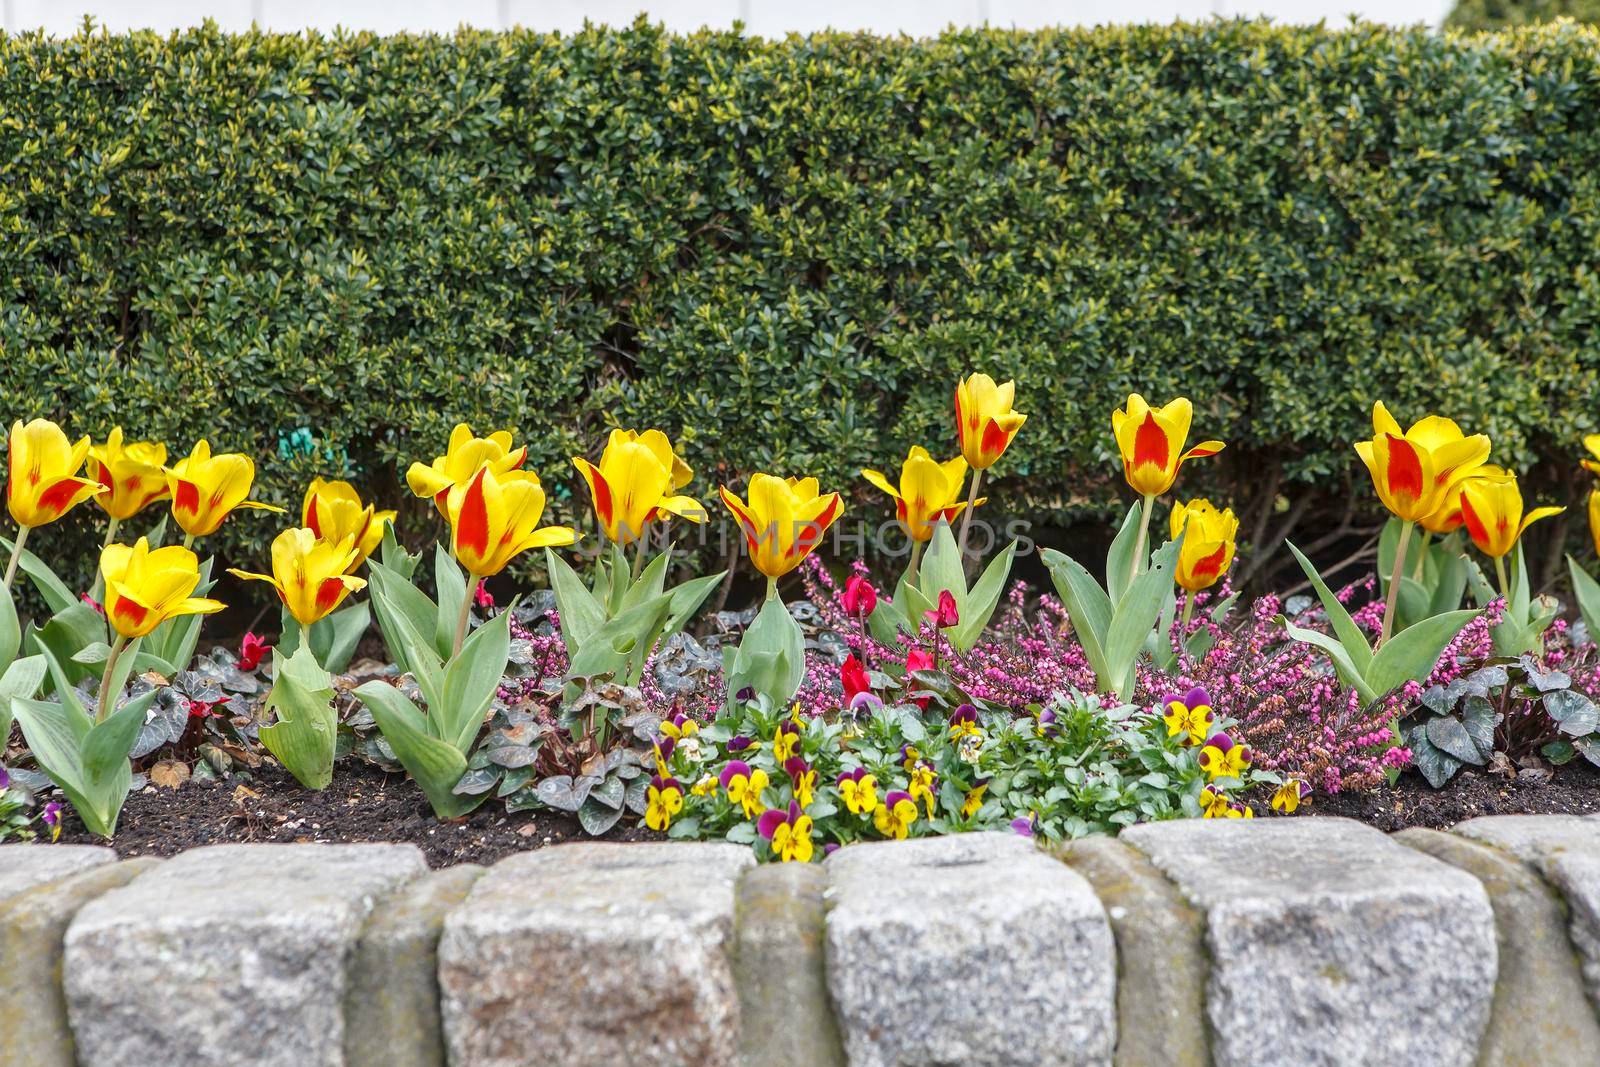 Yellow-red tulips are planted in a row on a stone parapet against the backdrop of an evergreen topiary yew wall. Fence by elenarostunova